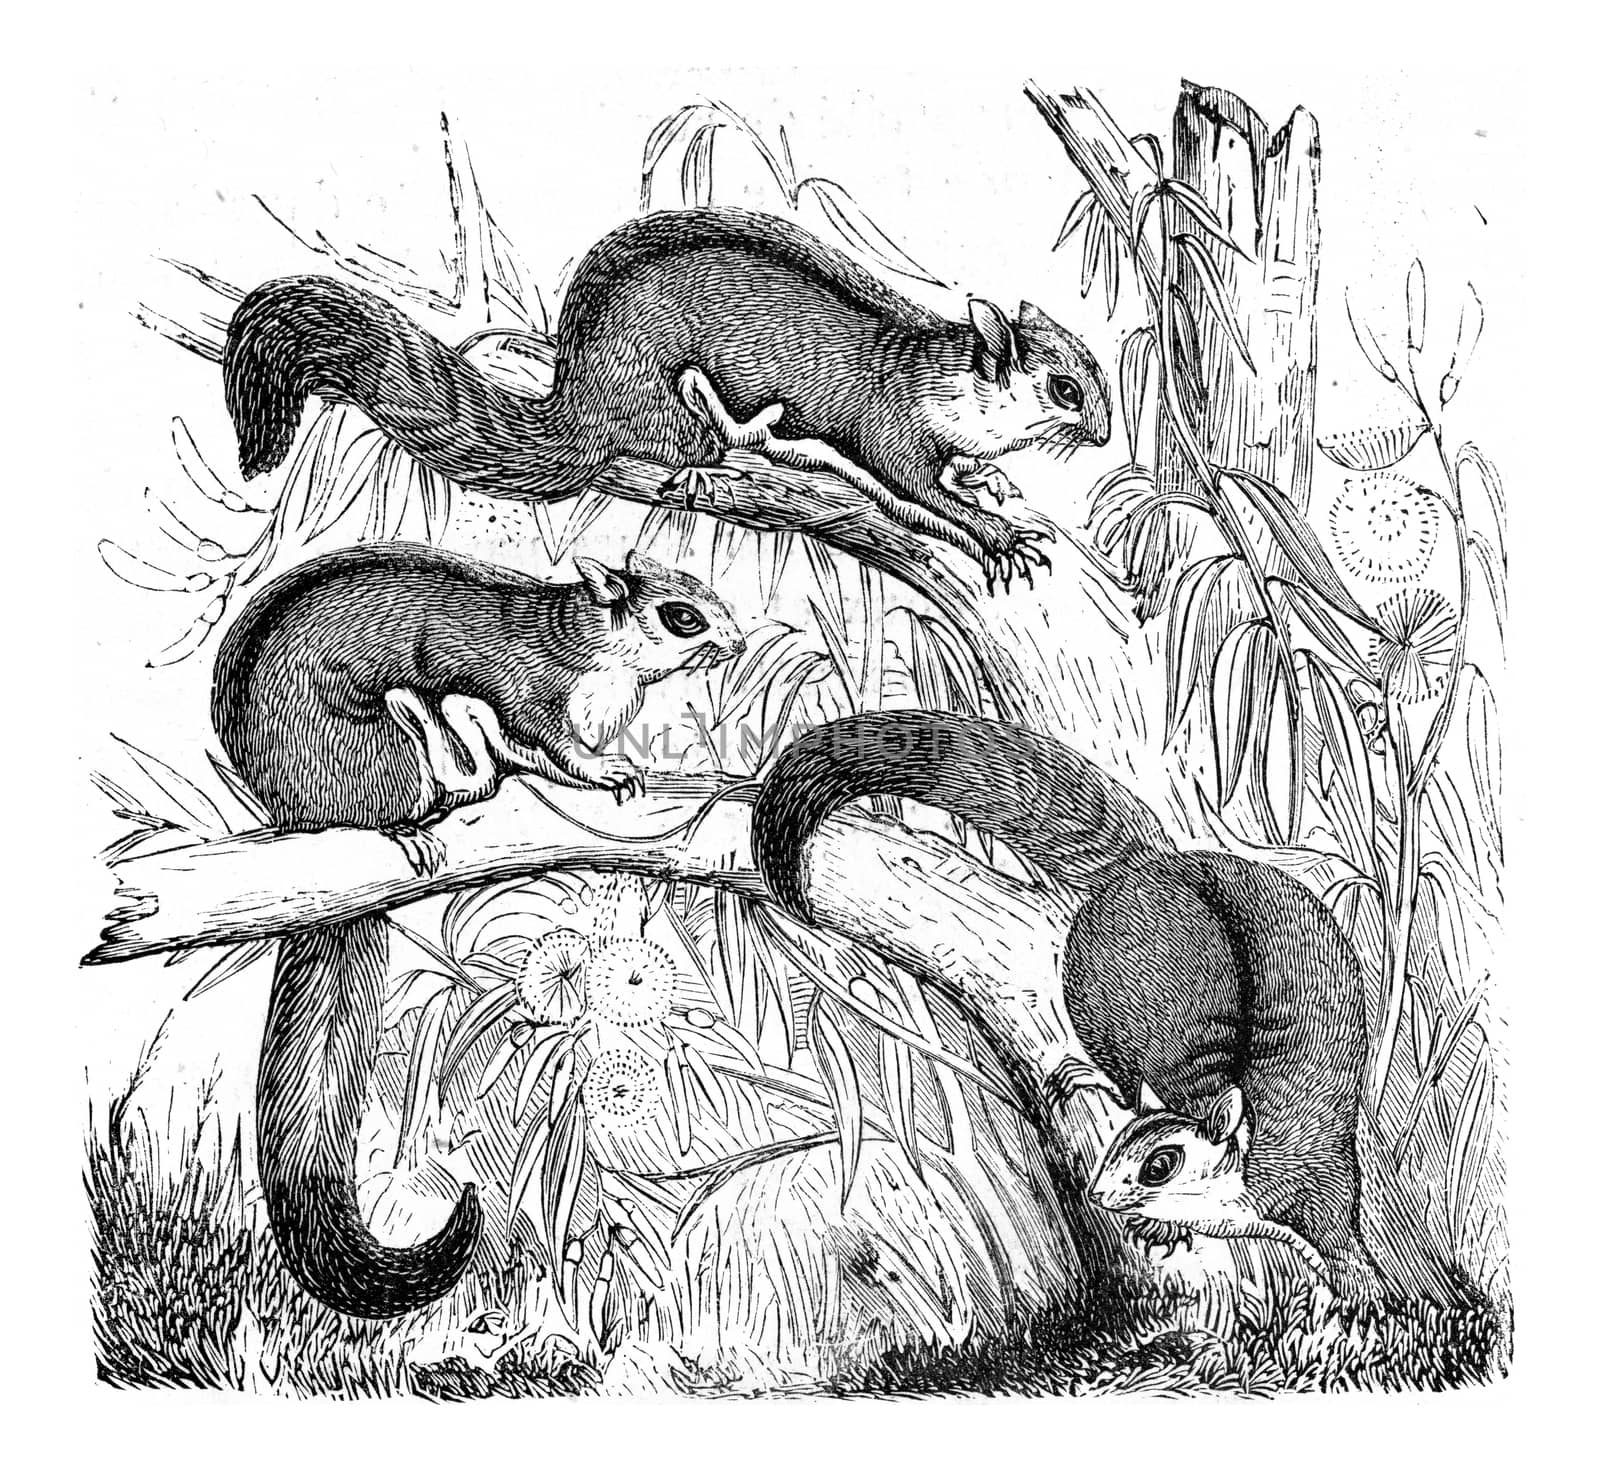 Petaurista, vintage engraved illustration. From Zoology Elements from Paul Gervais.
